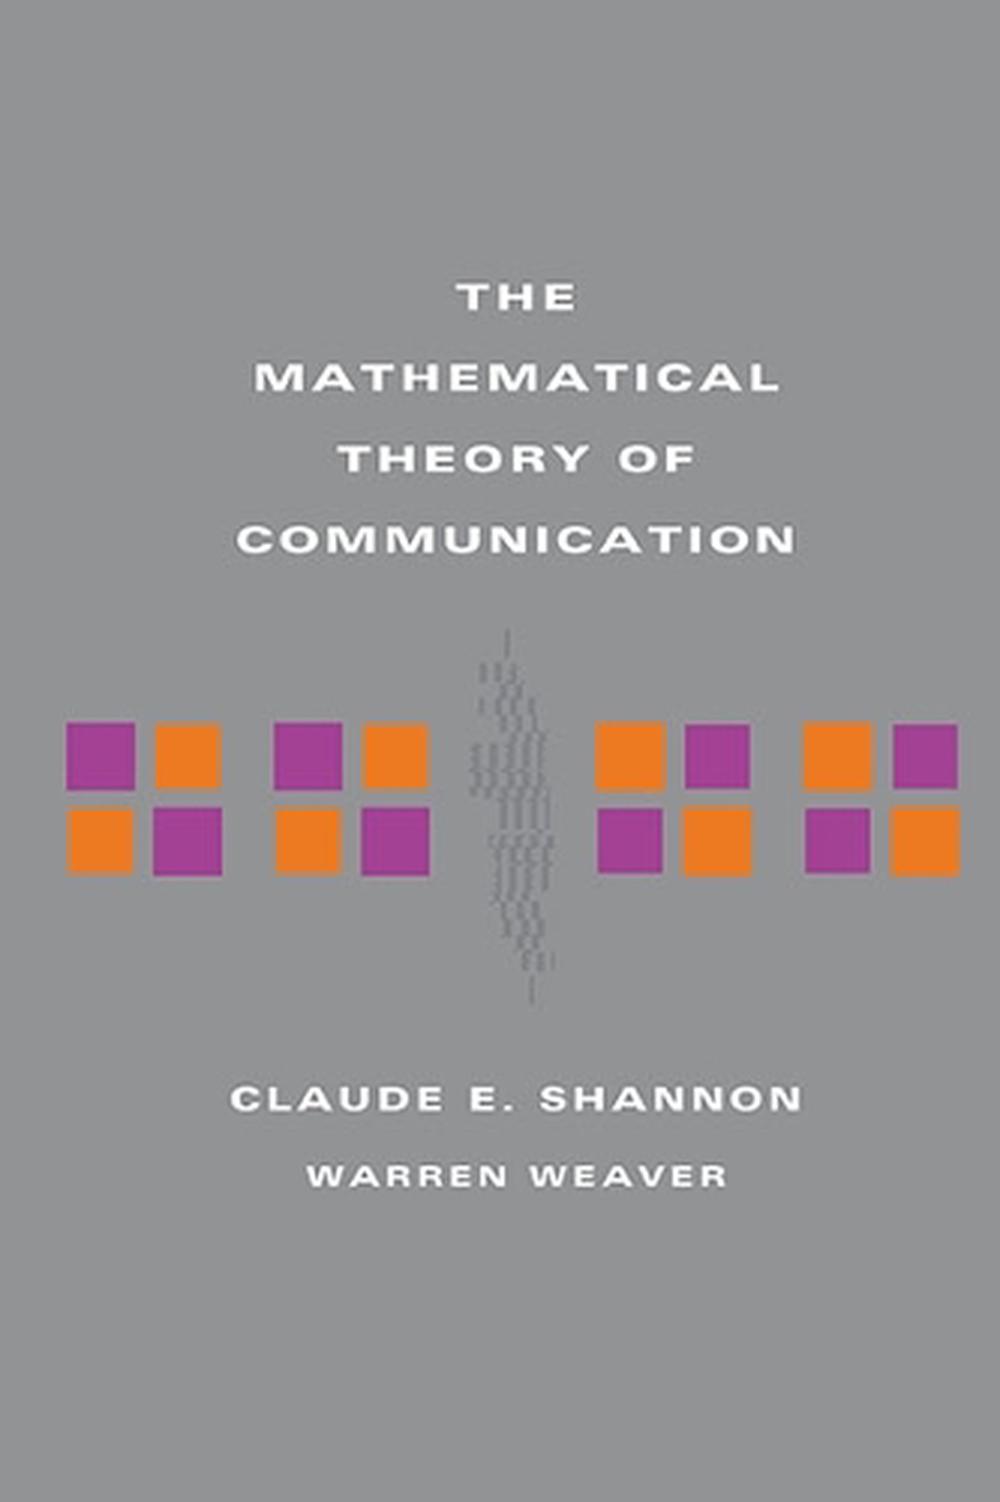 The Mathematical Theory of Communication by Claude Shannon